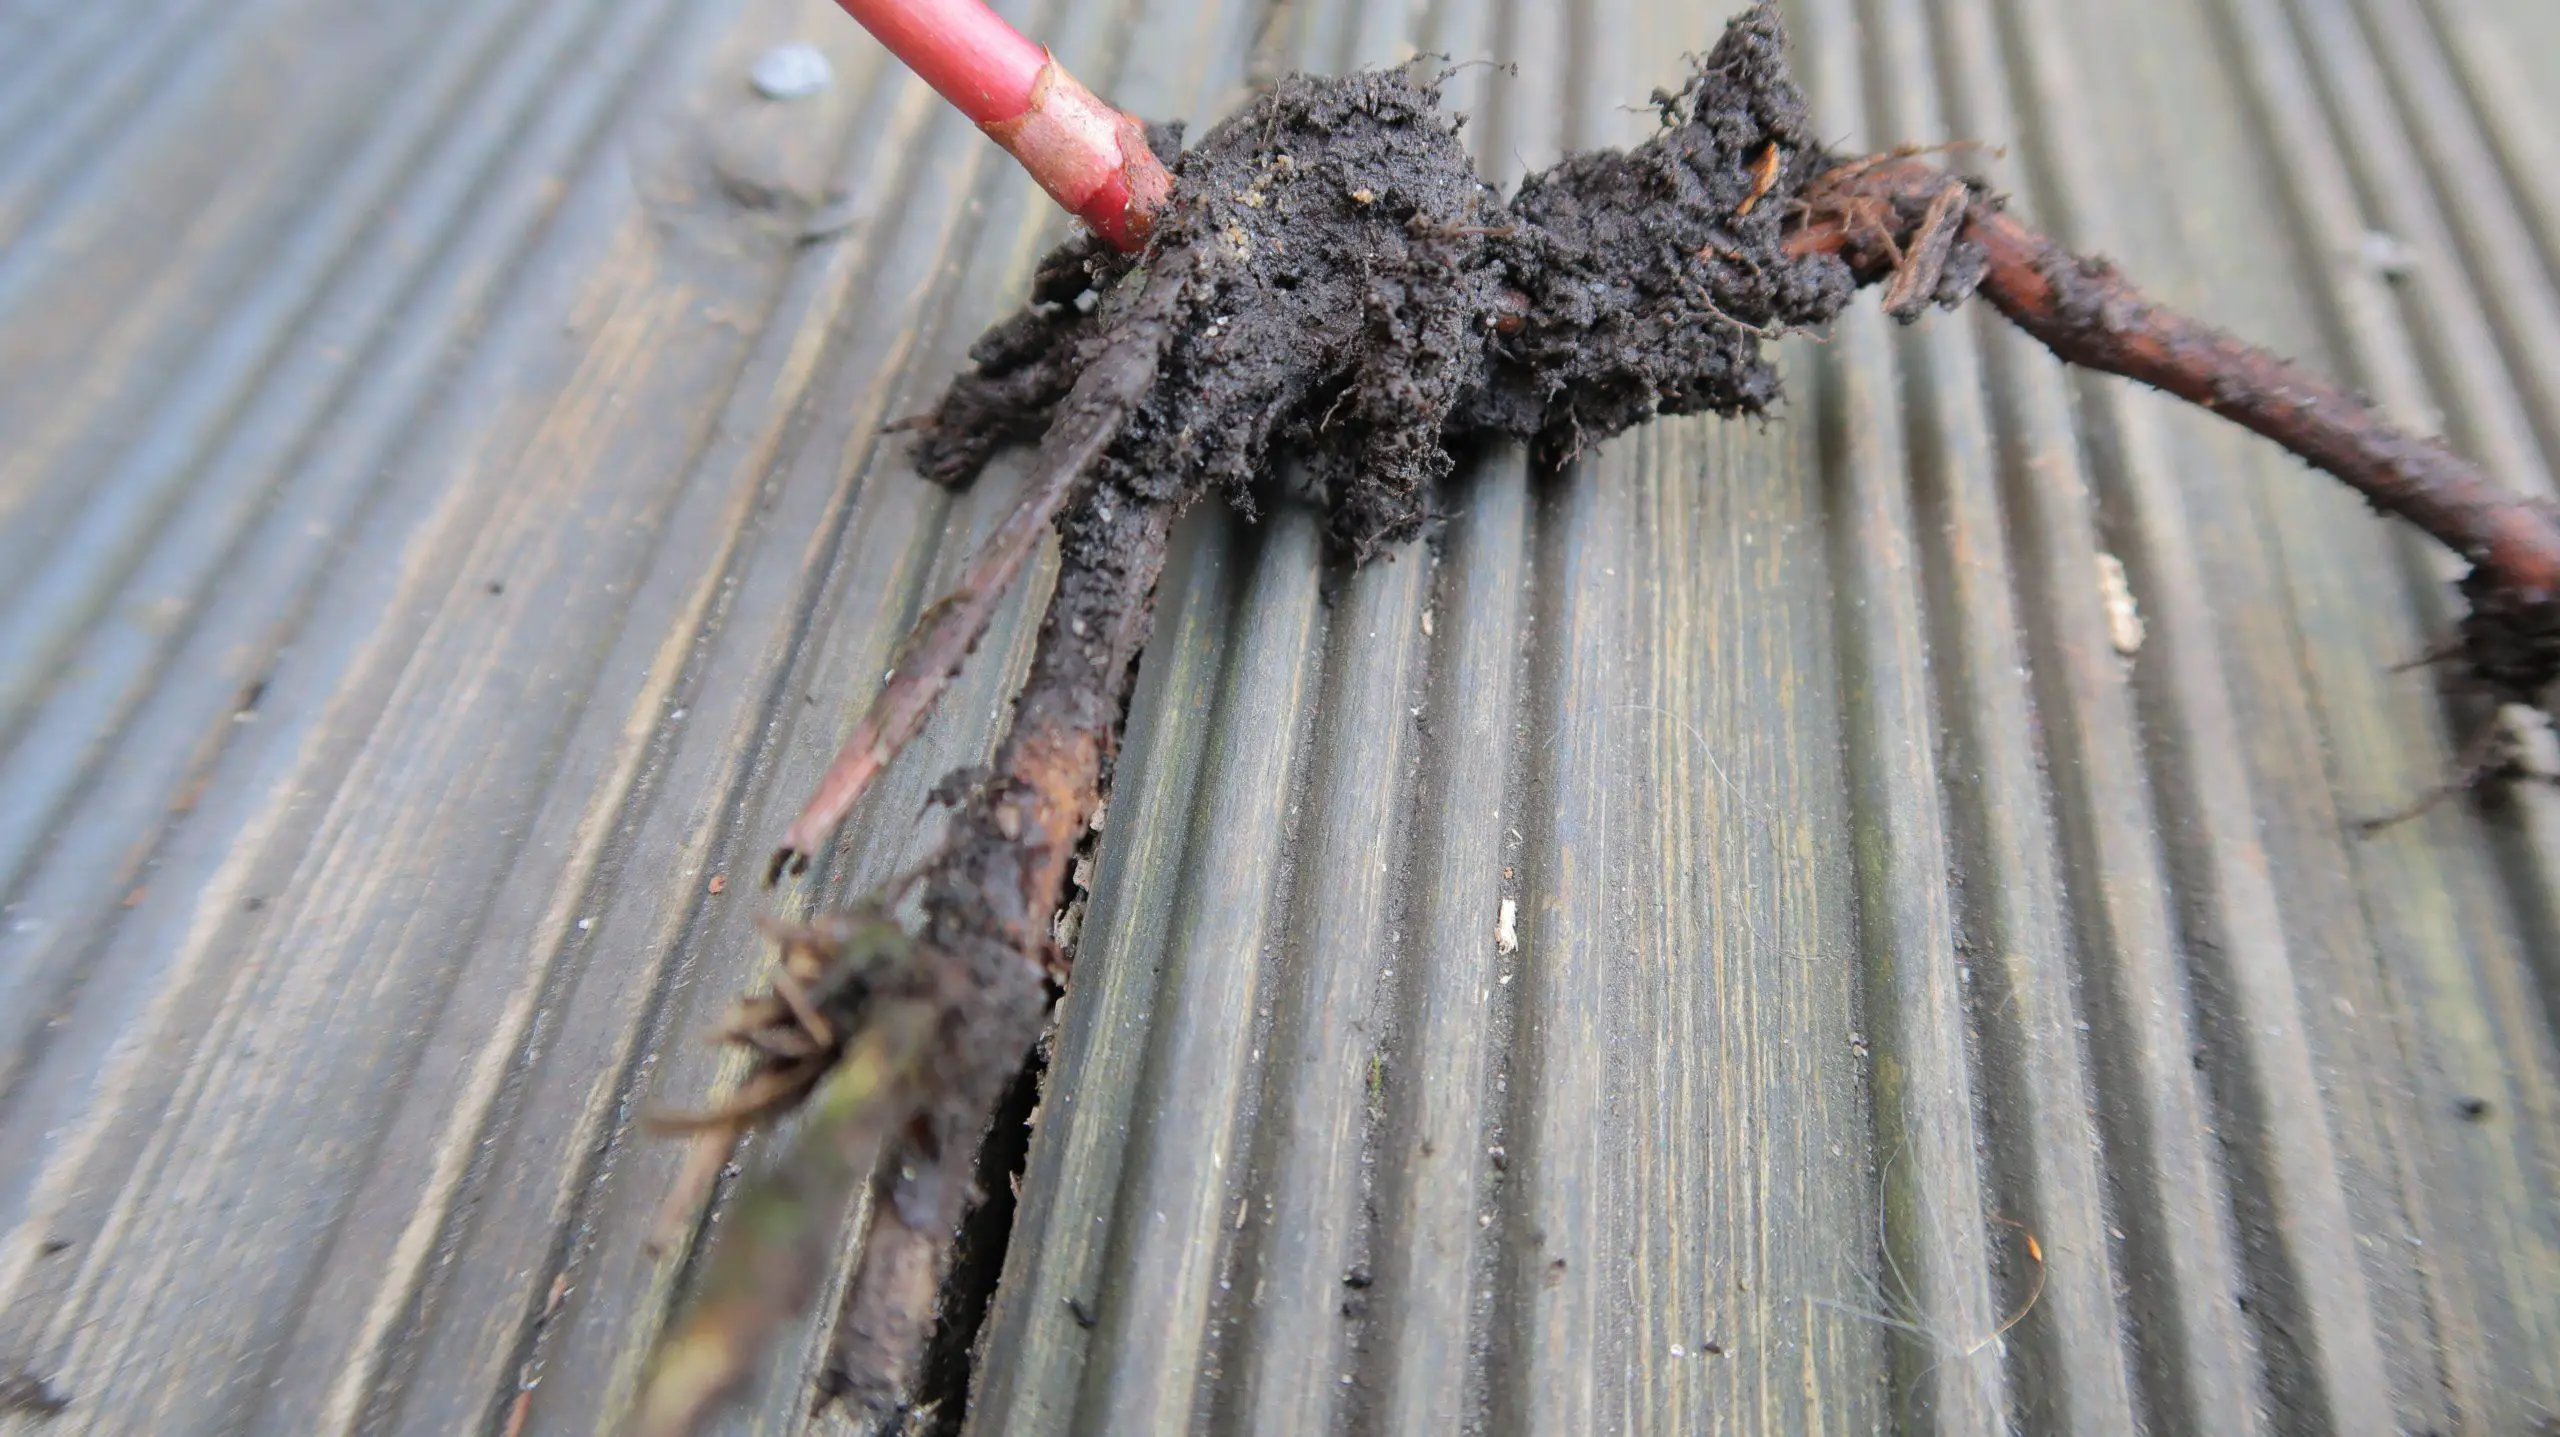 Japanese knotweed roots spread far and wide which makes them difficult to remove scaled